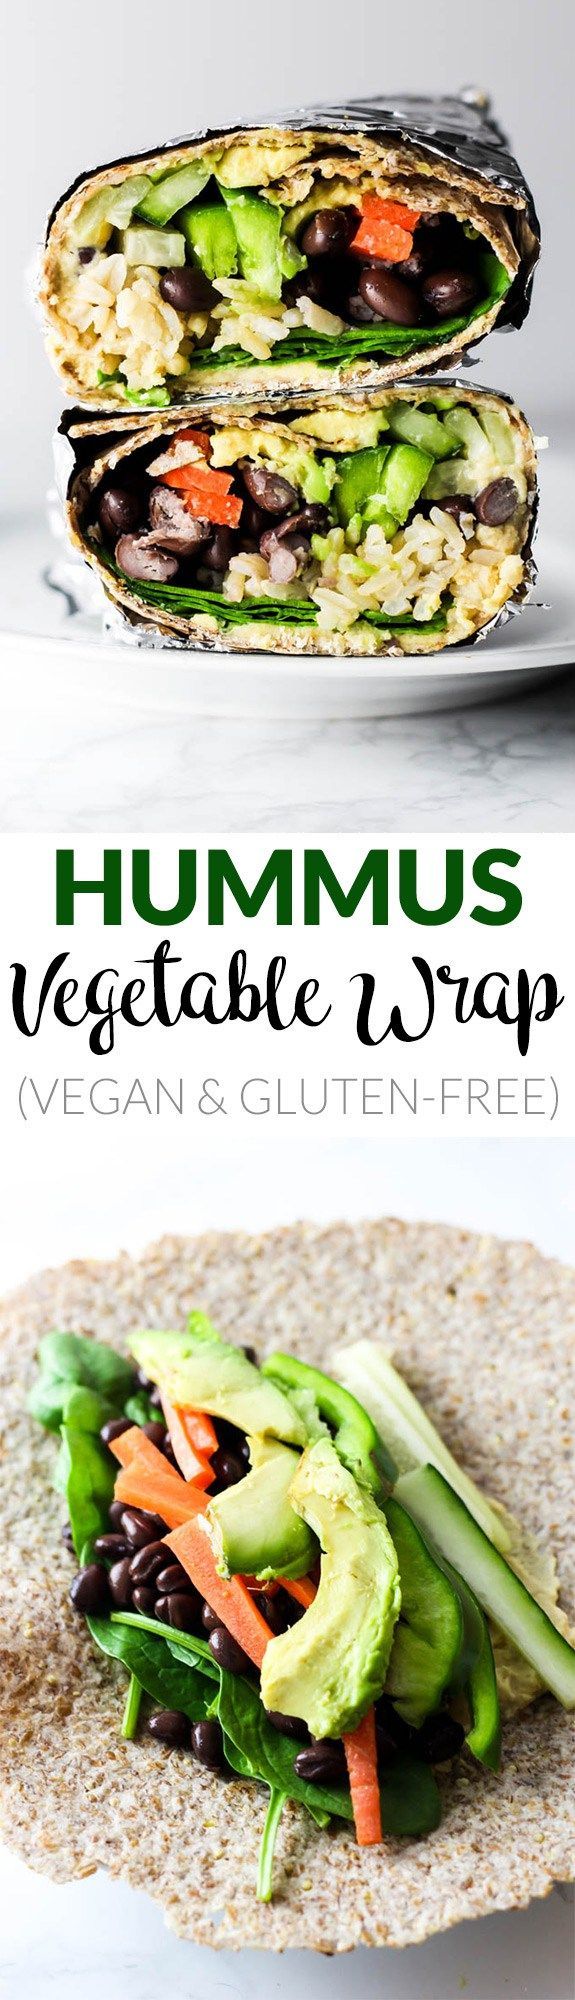 This Hummus Vegetable Wrap is a great on-the-go lunch option! Stuff it with all of your favorite vegetables, beans & creamy